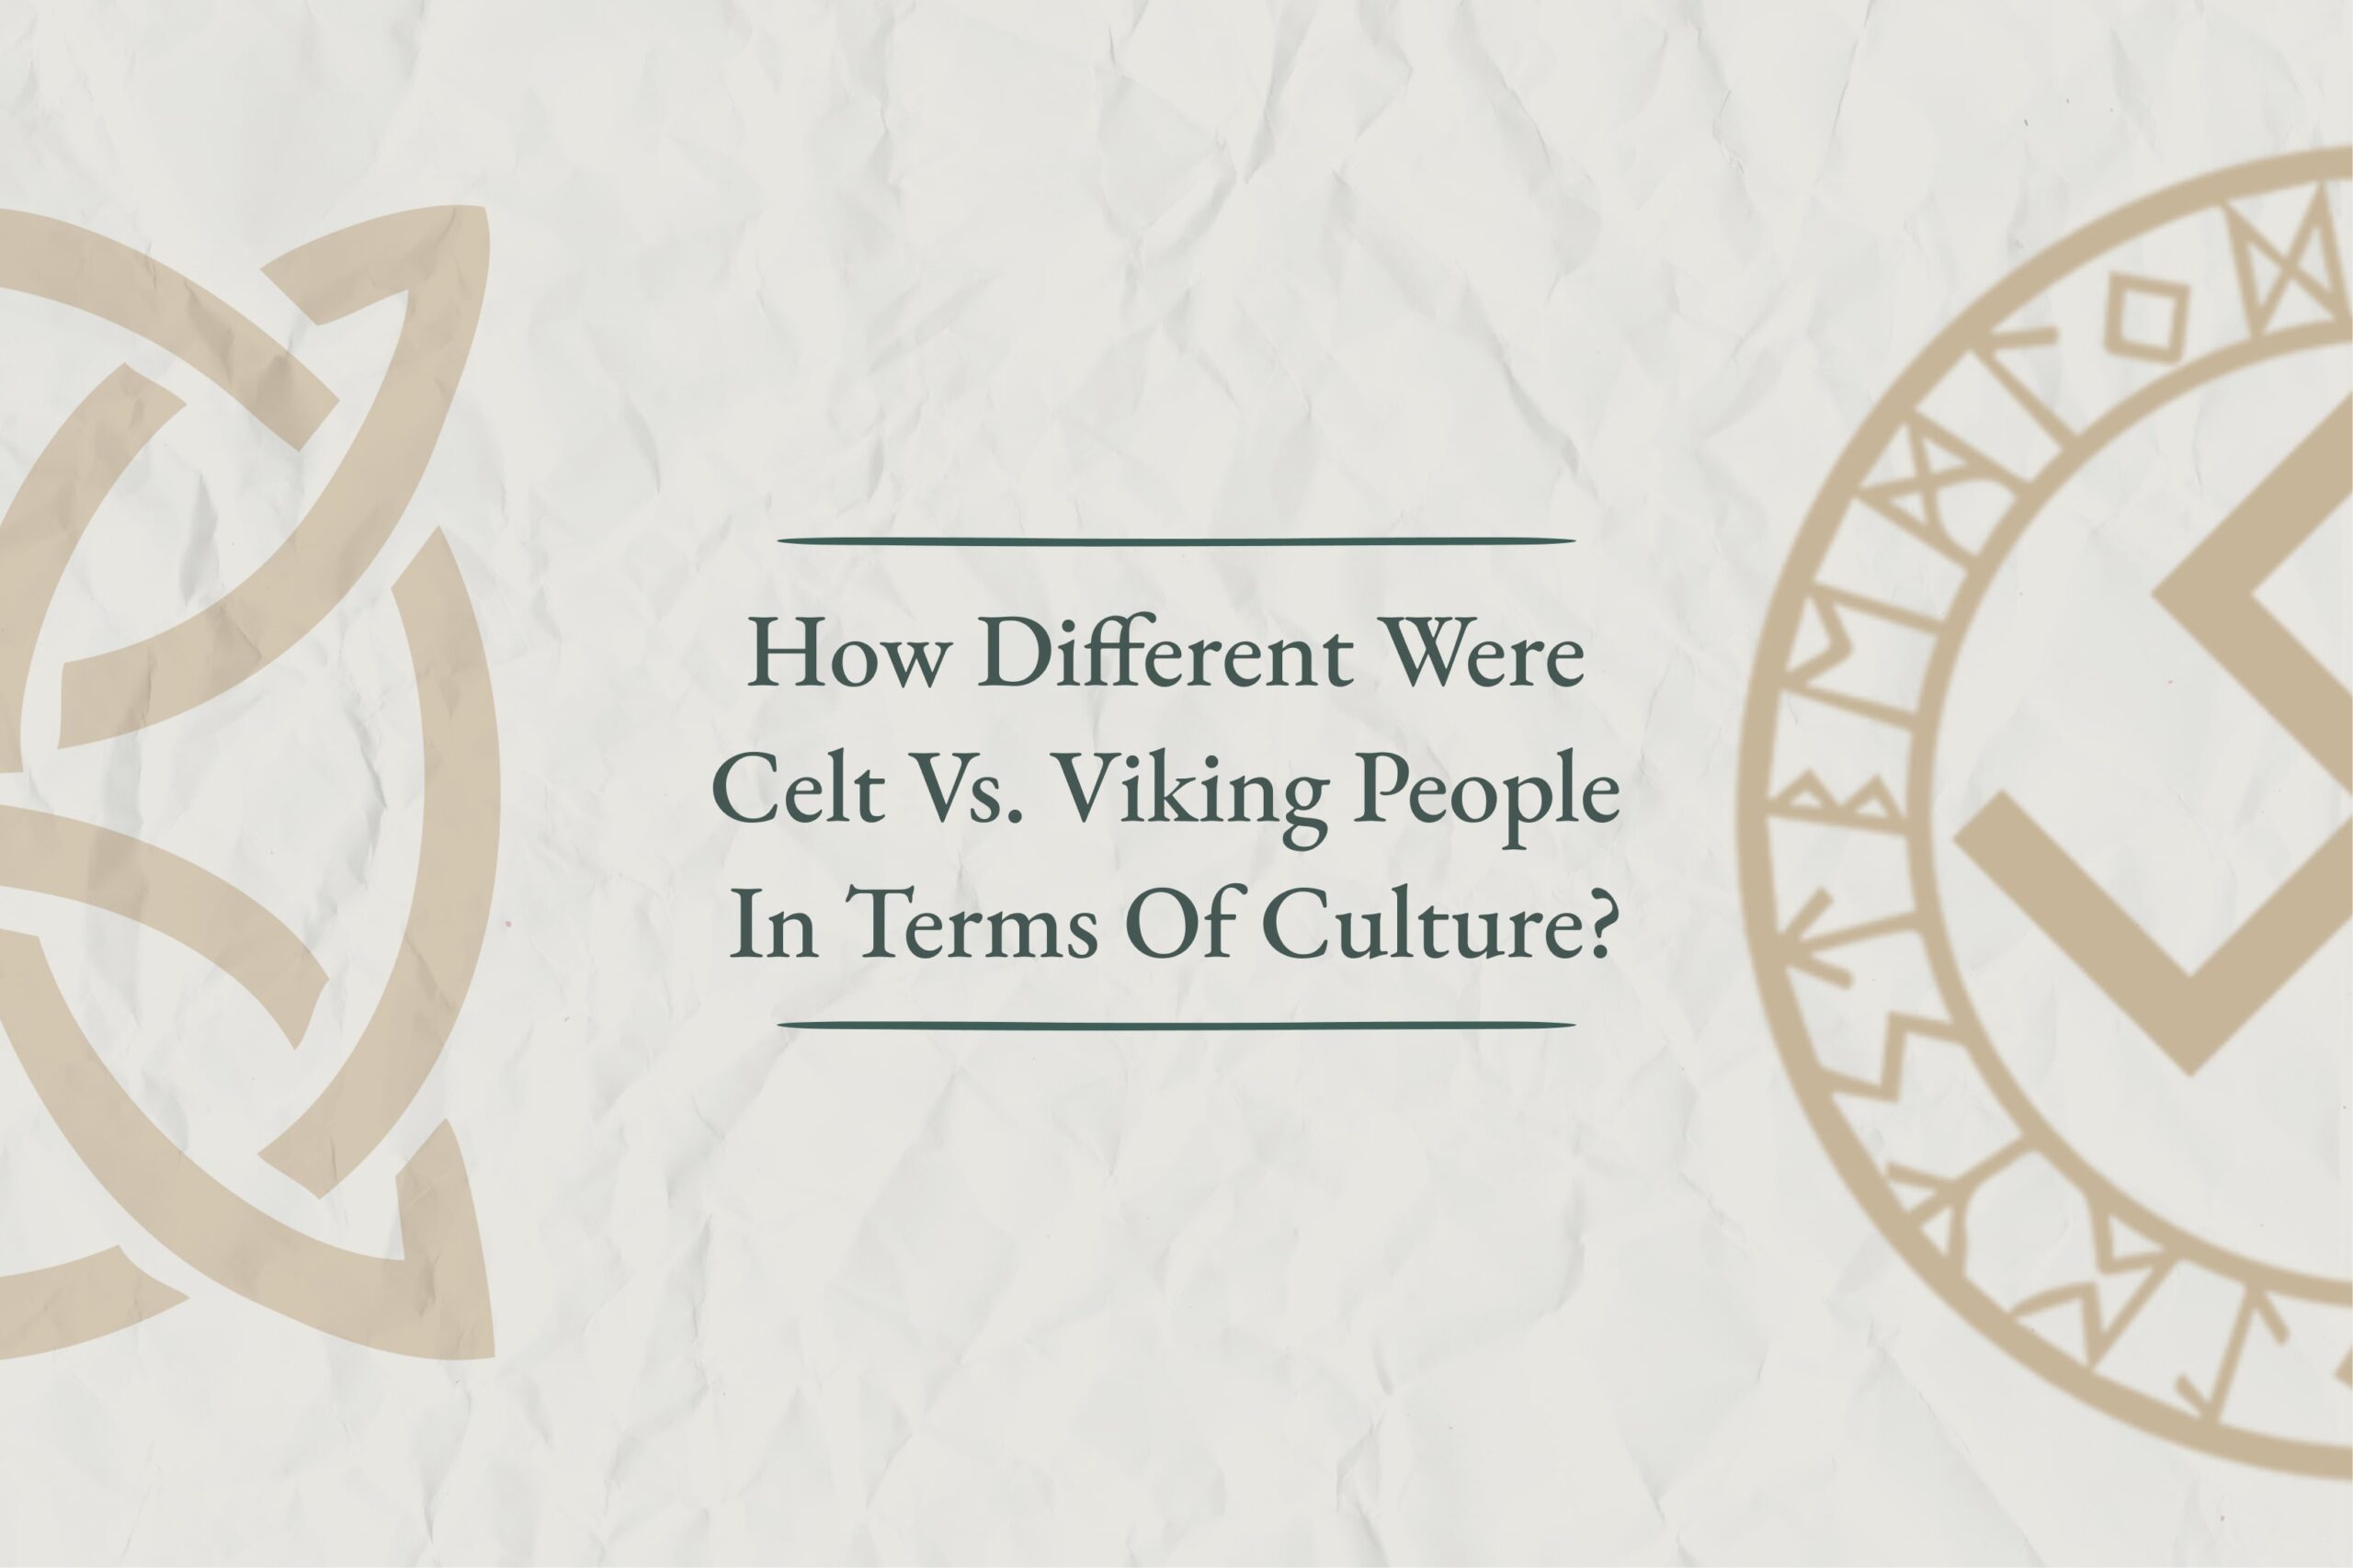 Vikings vs Celts: Differences, History, and Culture - Silent Balance